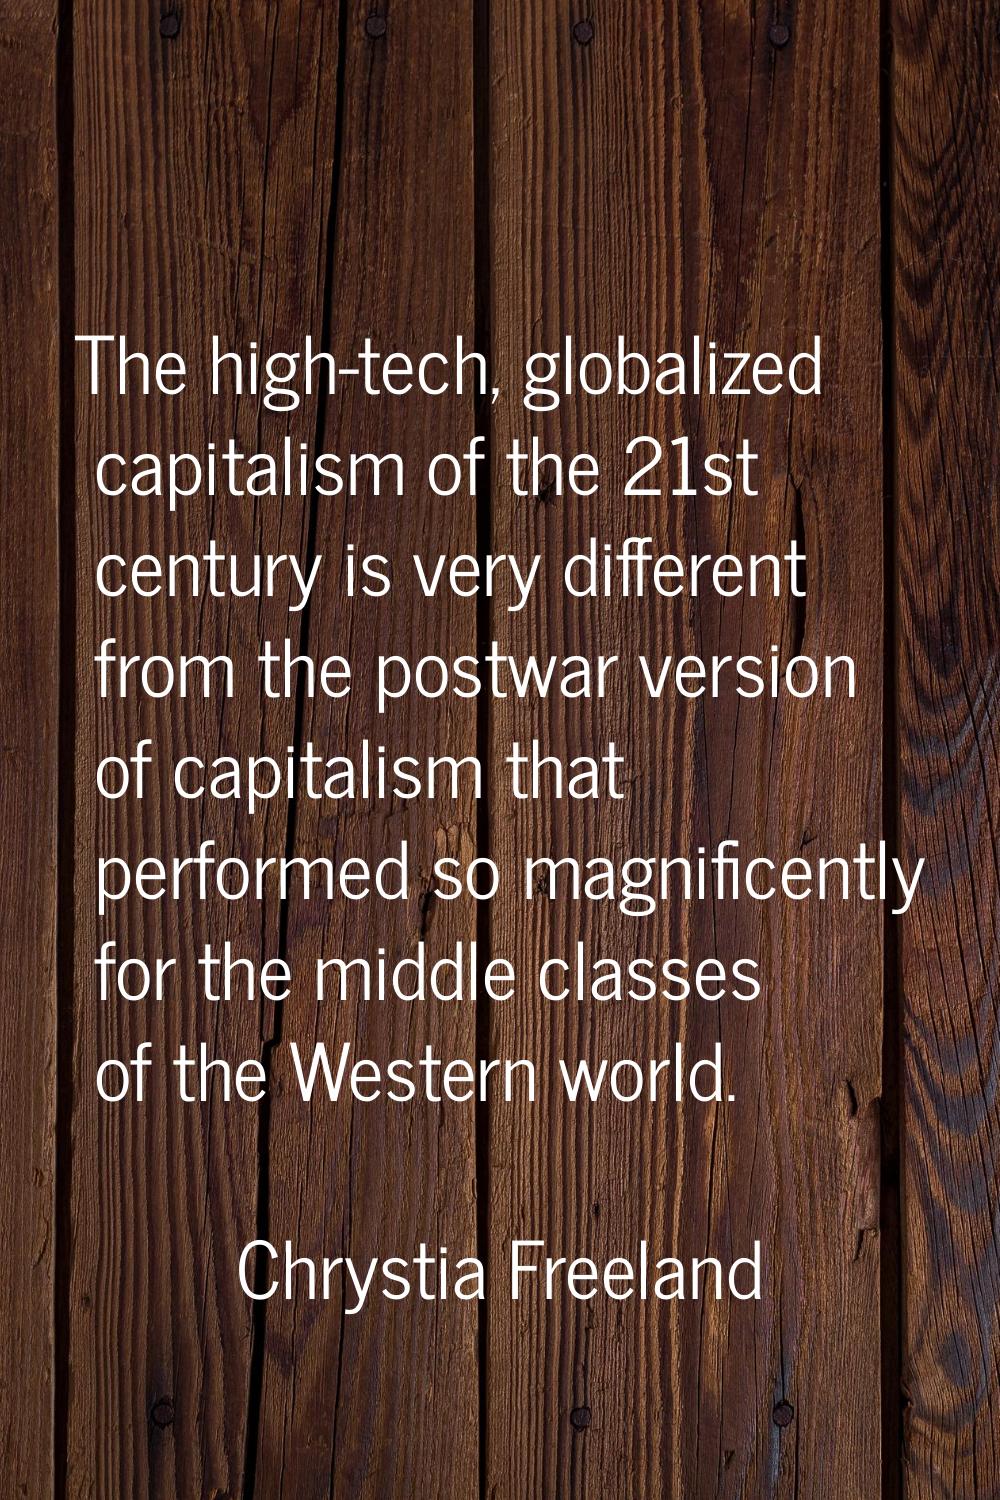 The high-tech, globalized capitalism of the 21st century is very different from the postwar version